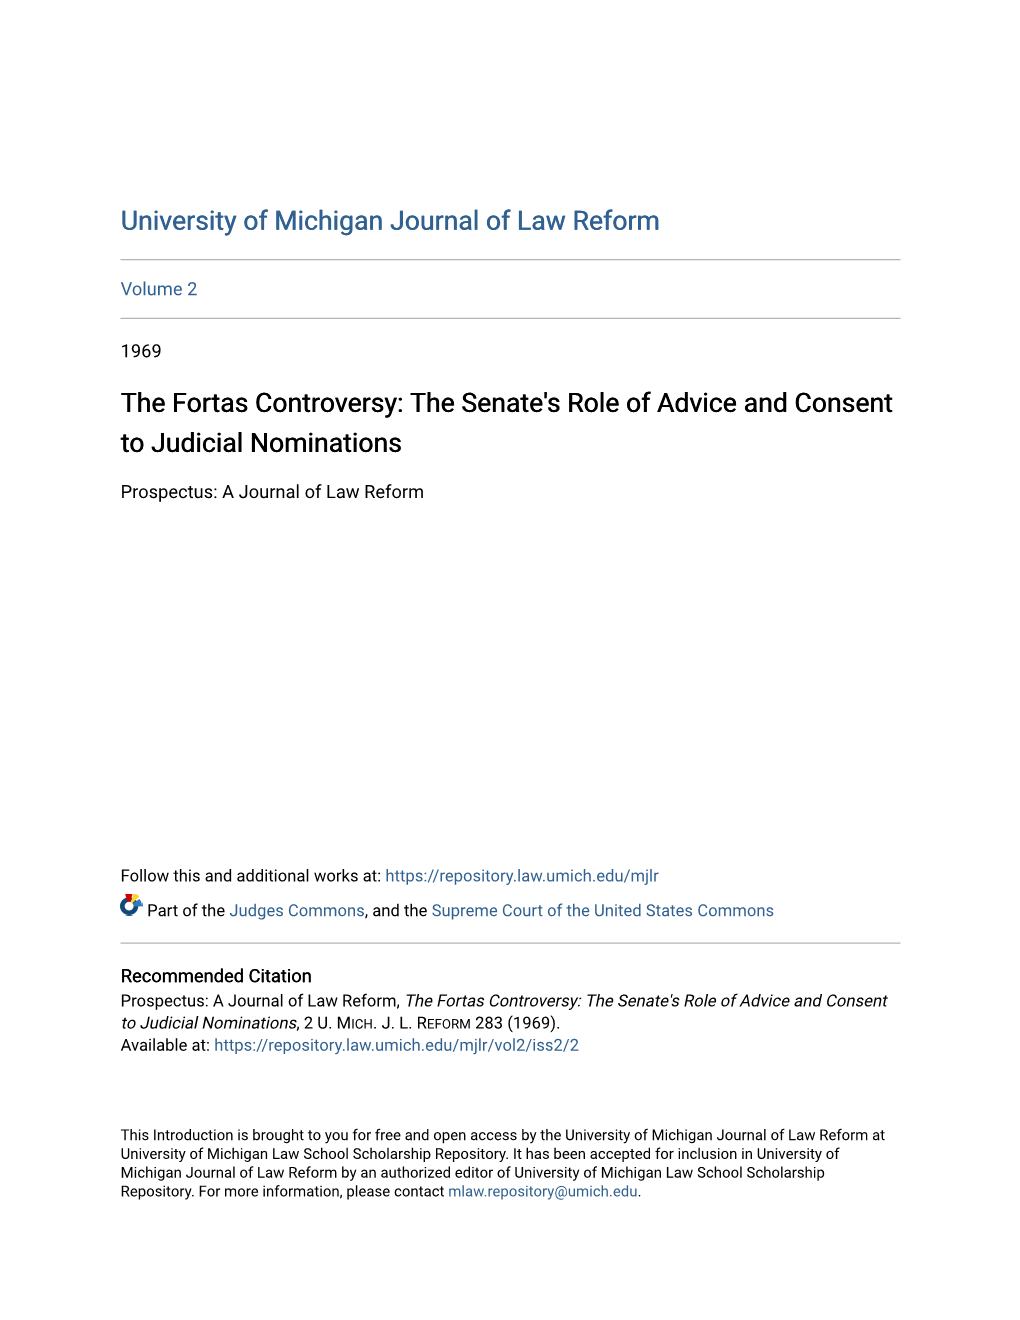 The Fortas Controversy: the Senate's Role of Advice and Consent to Judicial Nominations